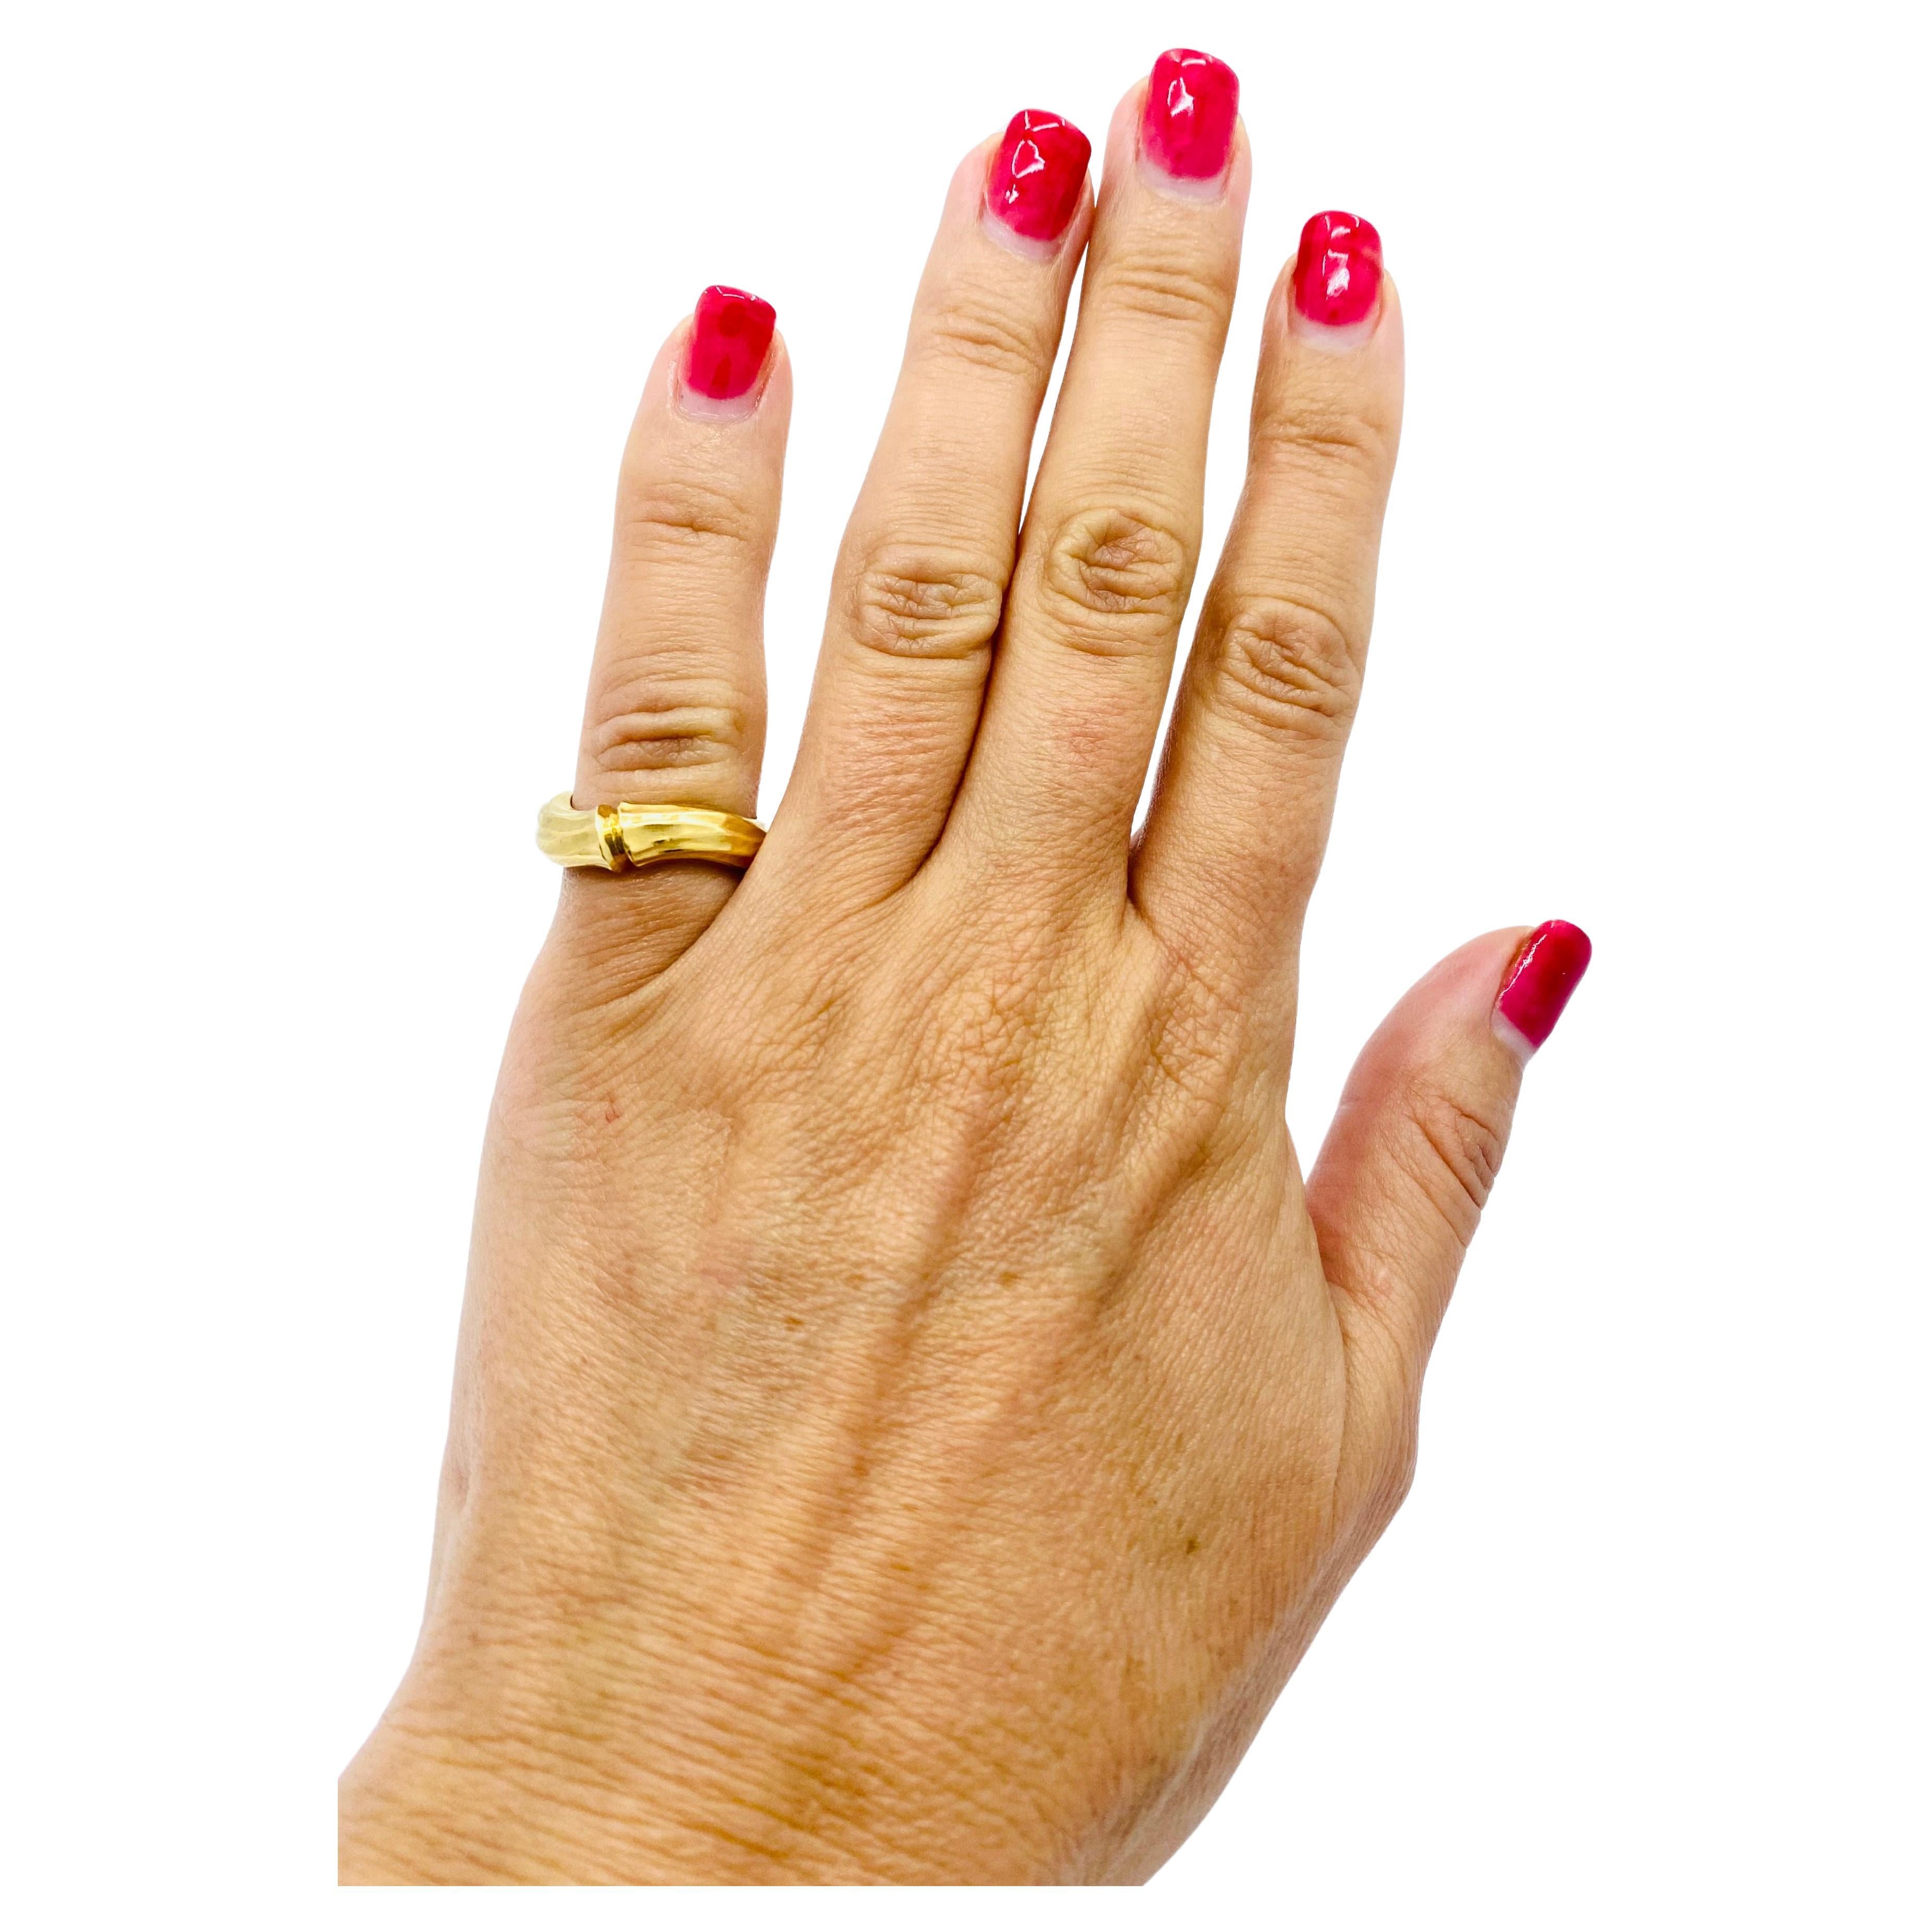 DESIGNER: Cartier
CIRCA: 1970s
MATERIALS: 18k Yellow Gold
WEIGHT: 7.2 grams
RING SIZE: 5.75-6
HALLMARKS: Cartier, 750, 678 444

A vintage ring by Cartier from Bamboo collection made of 18k gold.
The Cartier Bamboo collection is a line of jewelry and